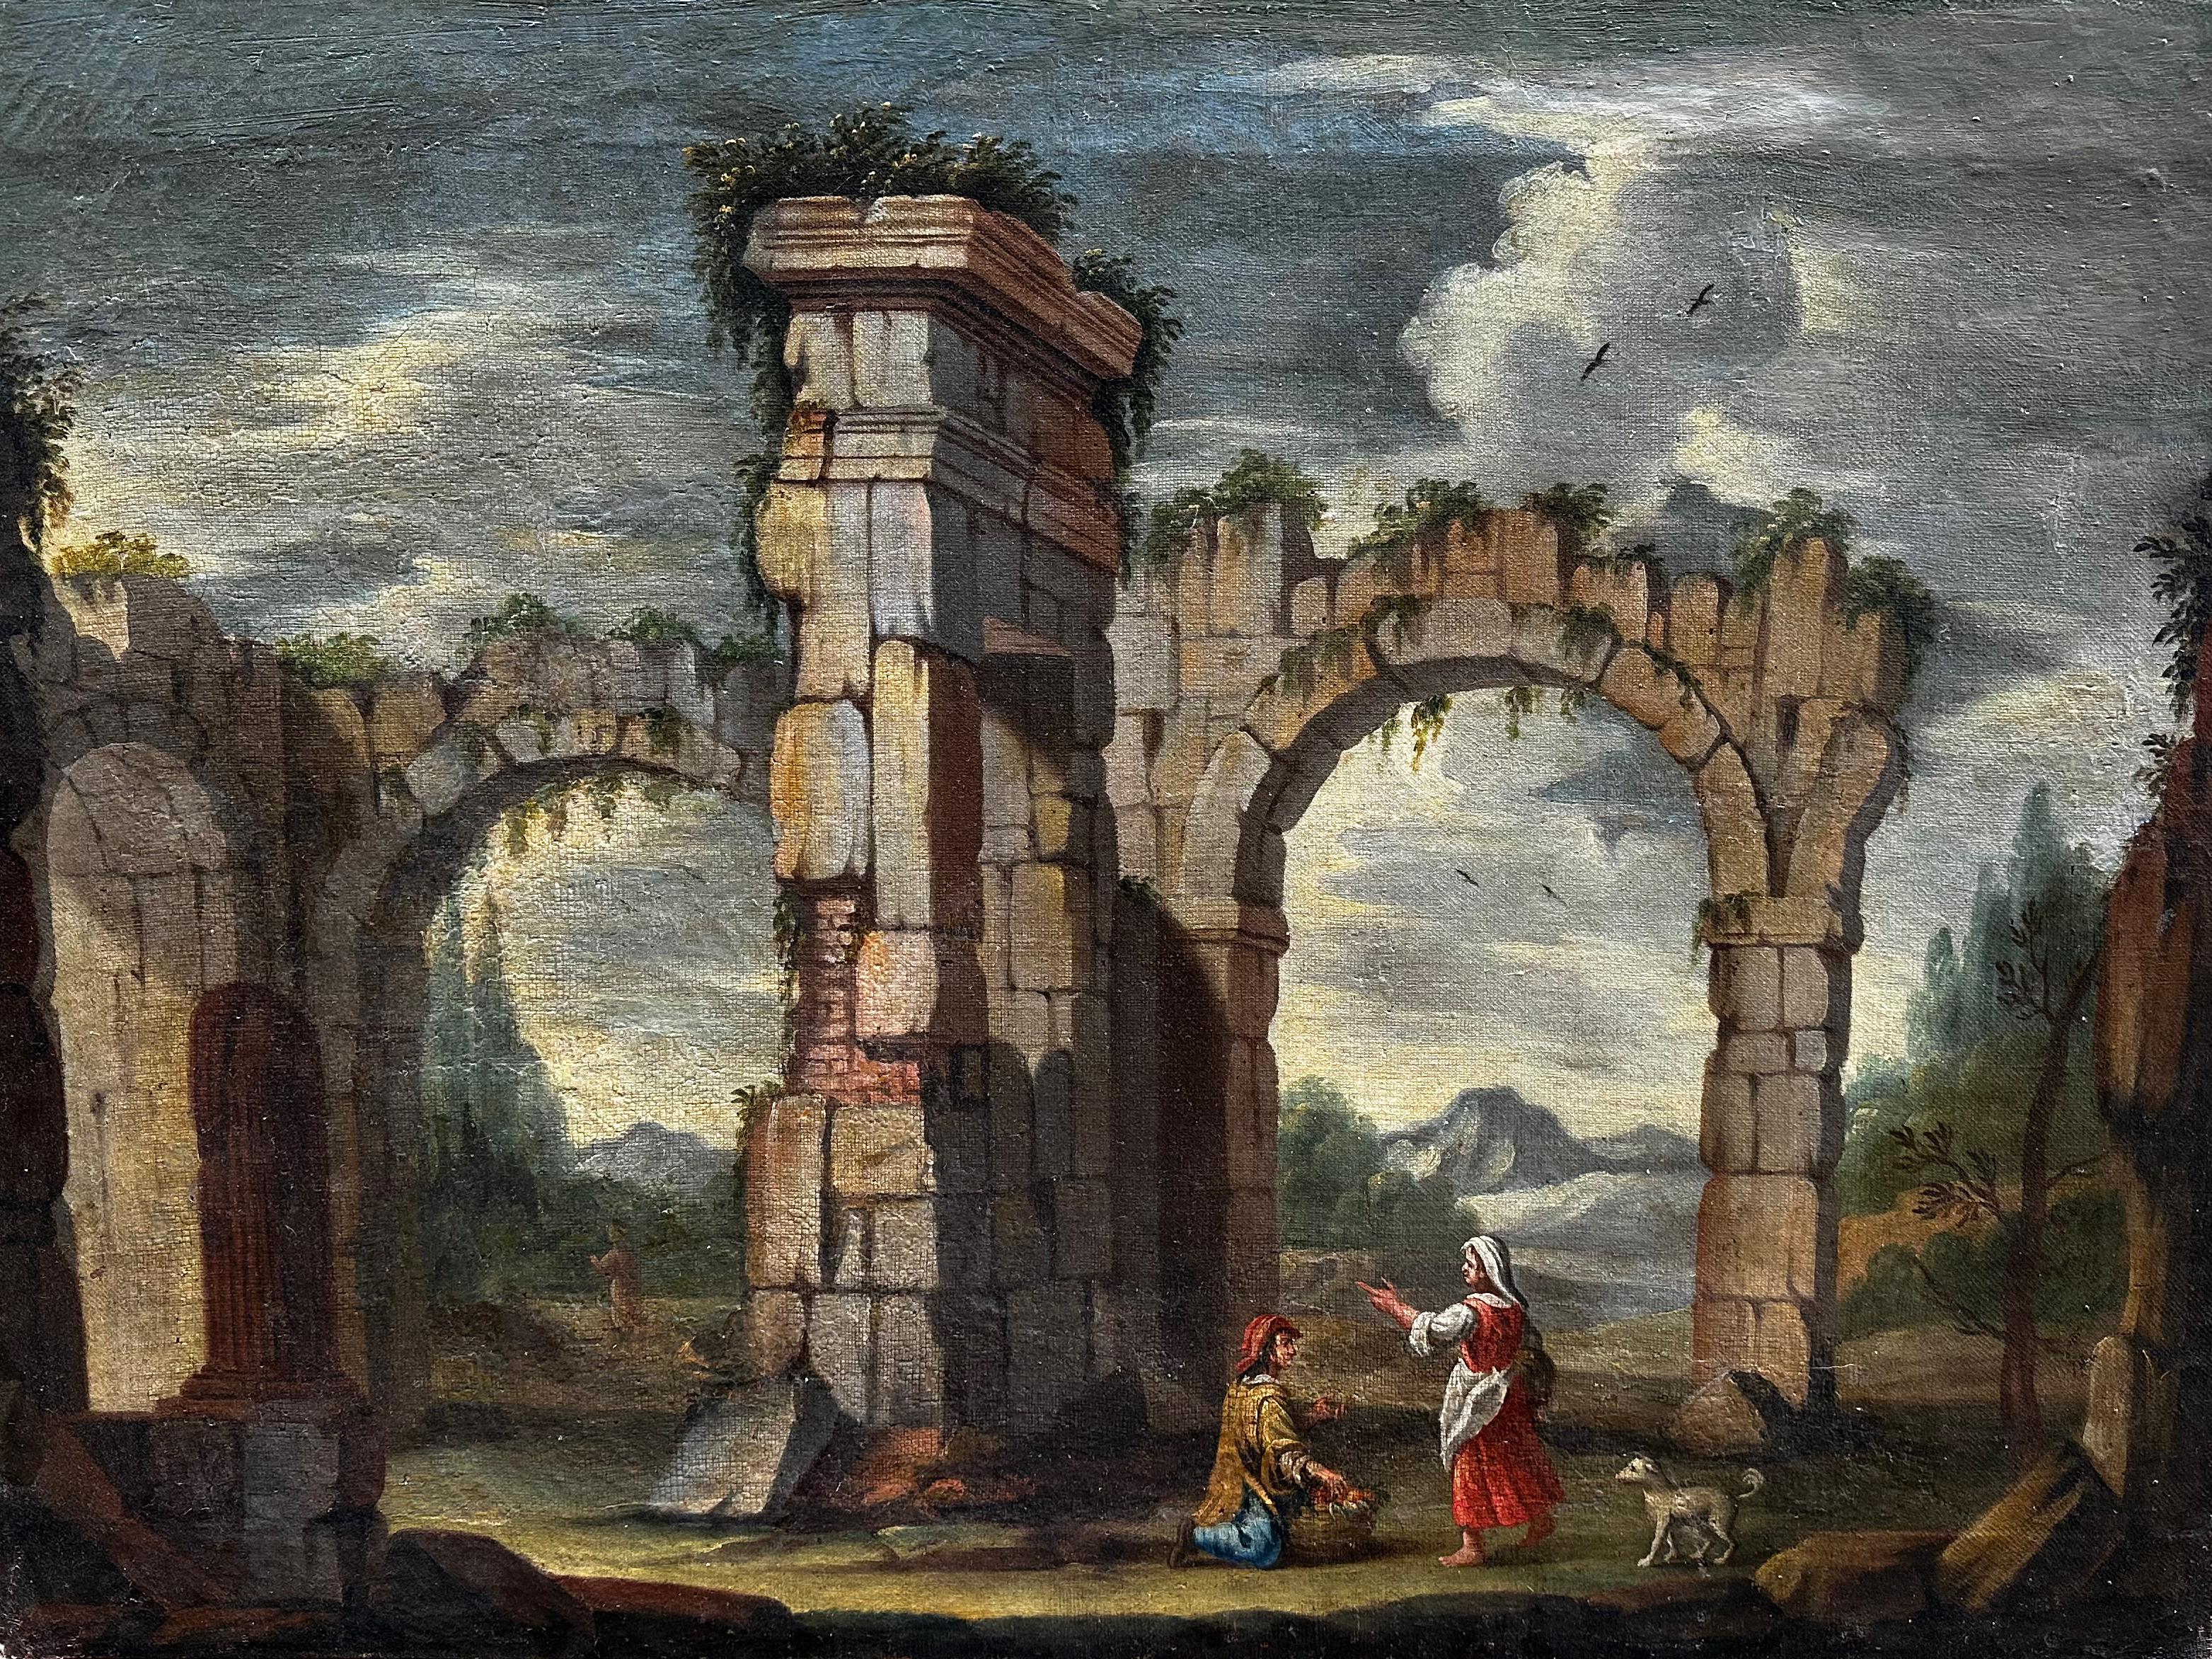 Unknown Landscape Painting - Architectural whimsy with Roman ruins, column and ancient arches. 